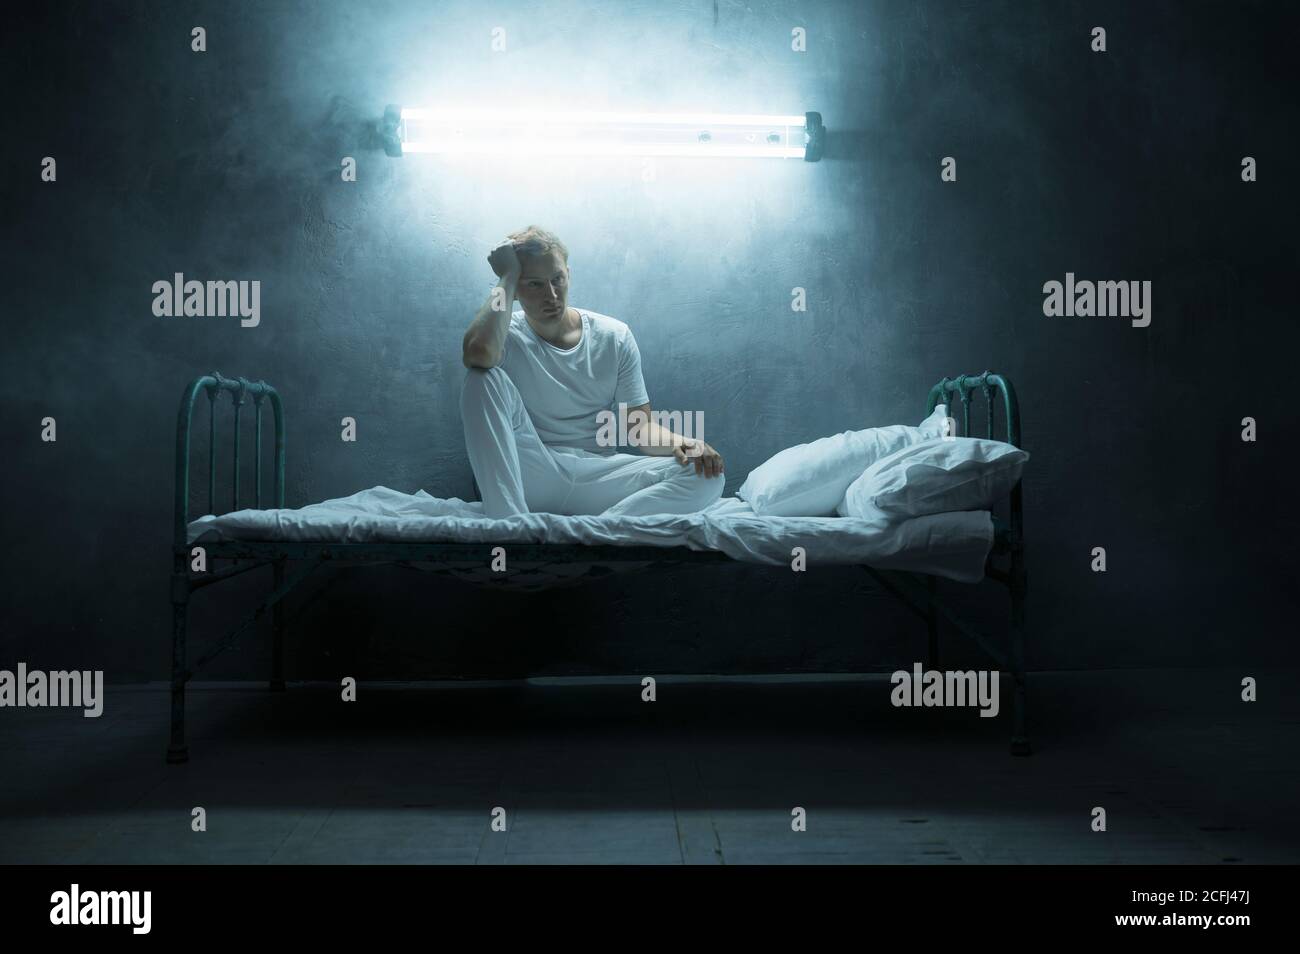 Mysterious image of a blindfolded man in a dark room stock photo